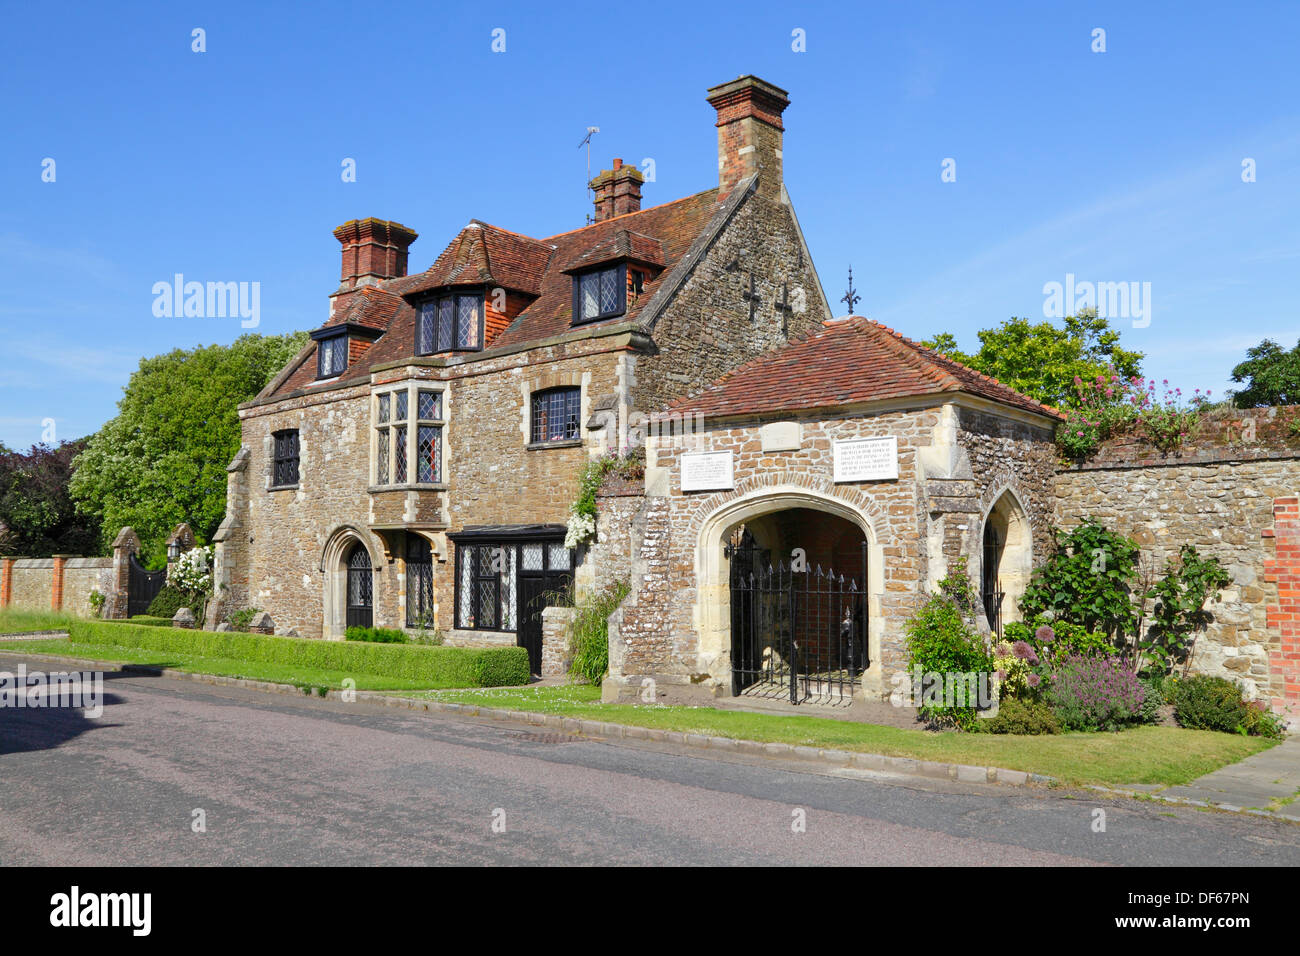 The Armoury and town well, Castle Street,  Winchelsea East Sussex England UK Stock Photo